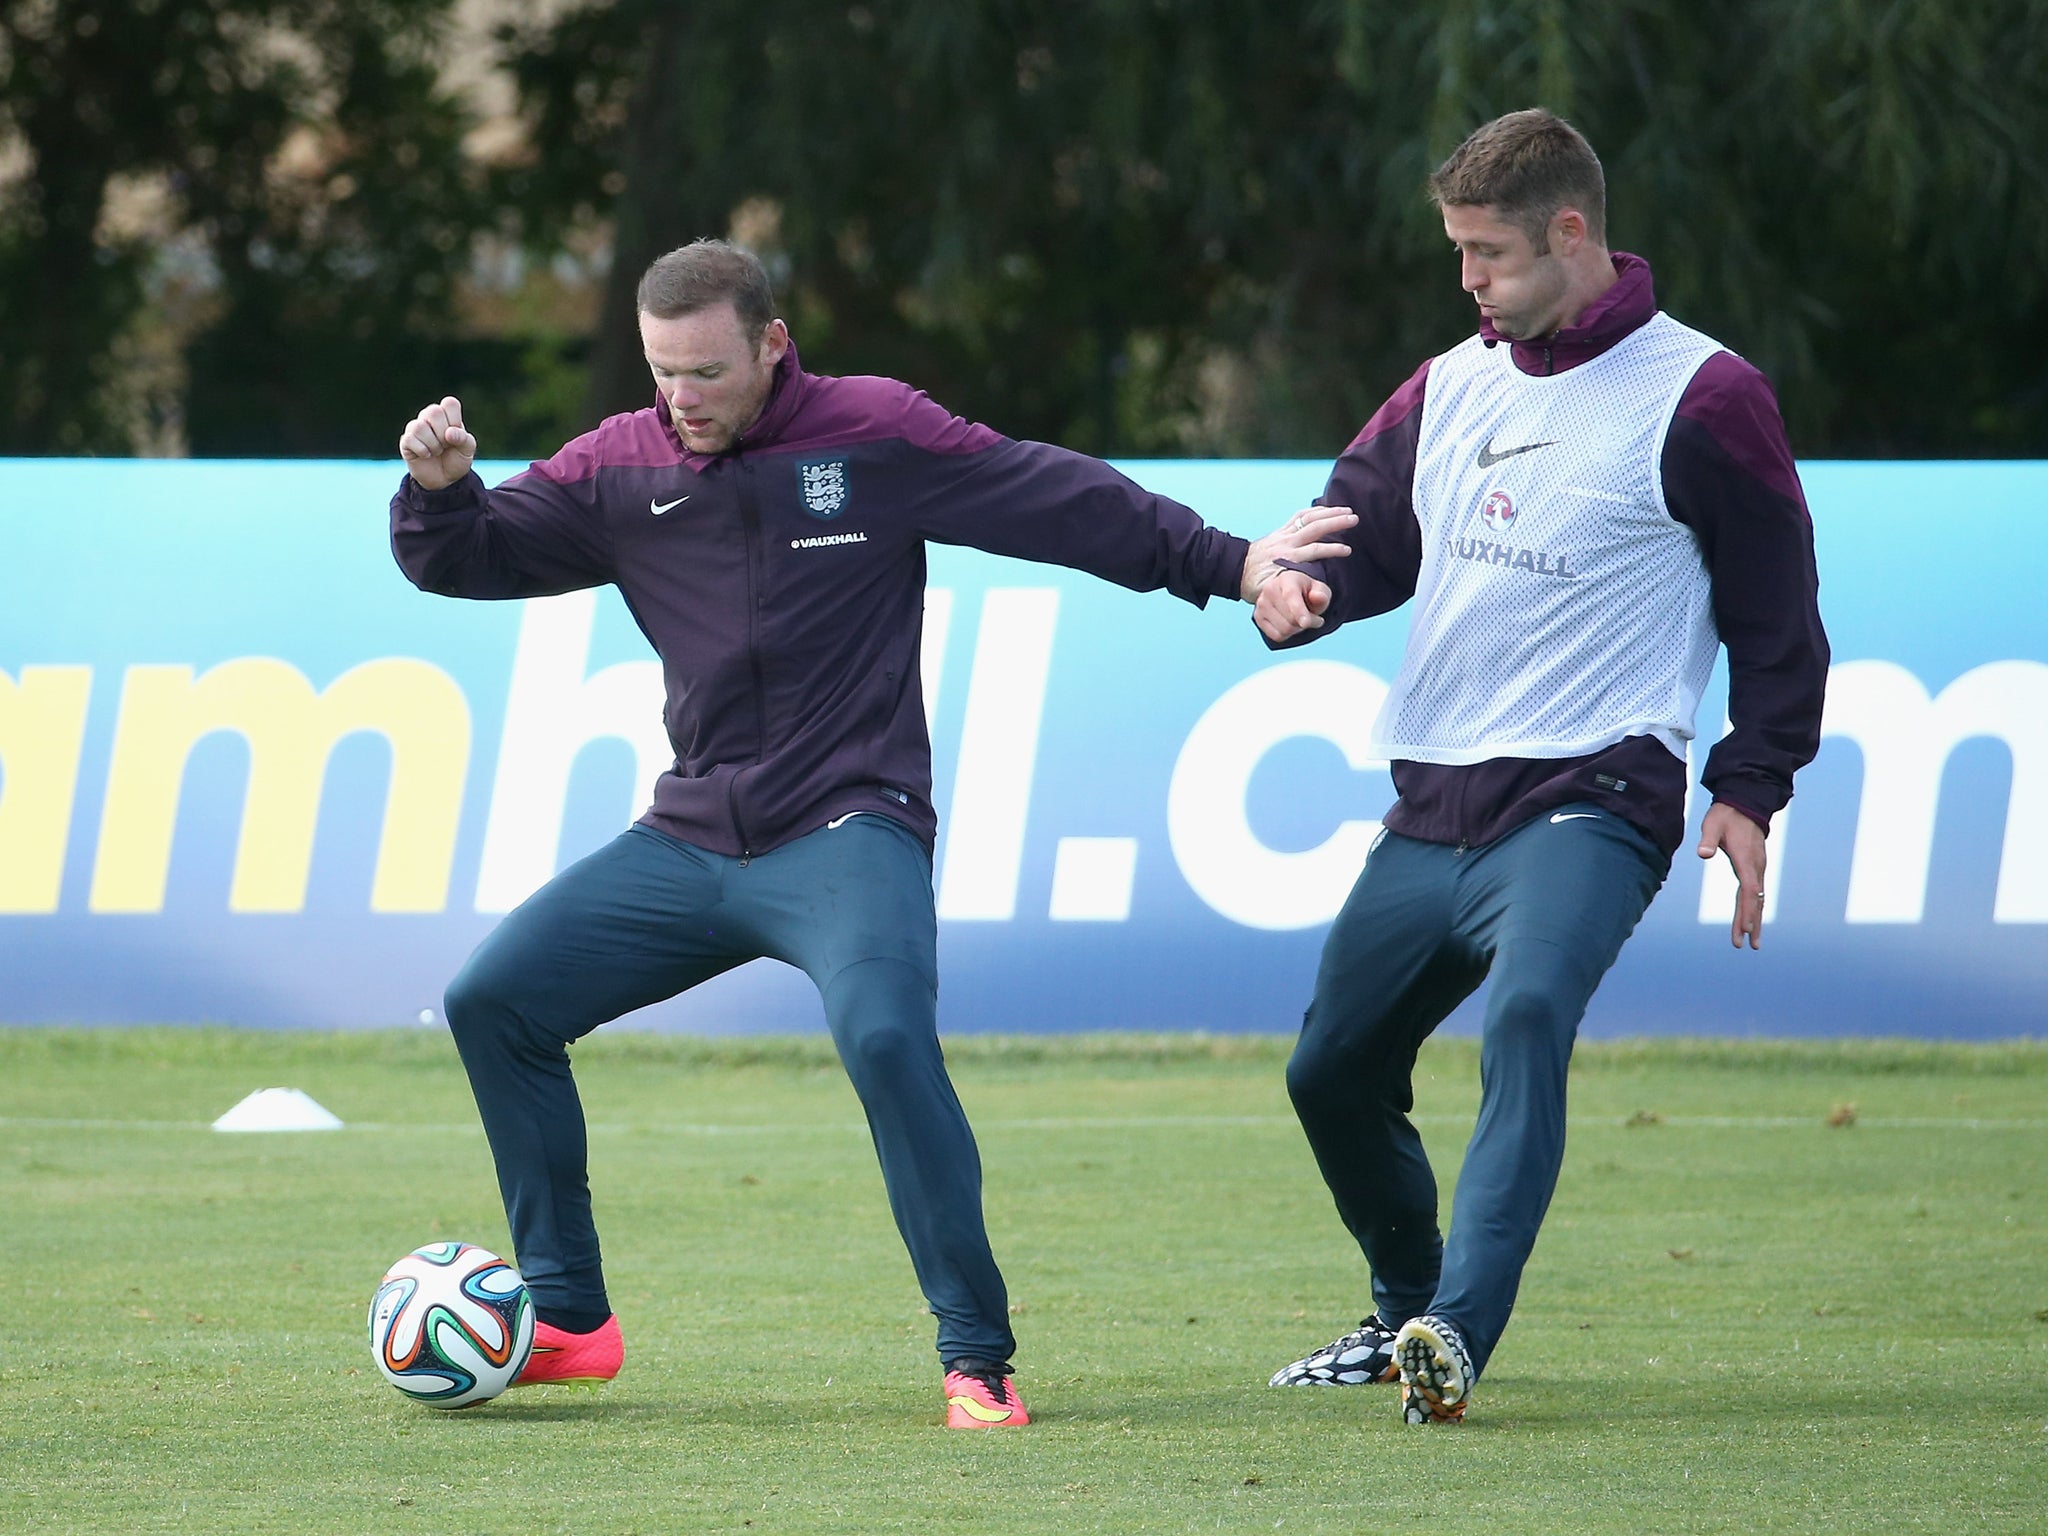 Wayne Rooney and Gary Cahill during warm weather traning for England in Portugal ahead of the world Cup